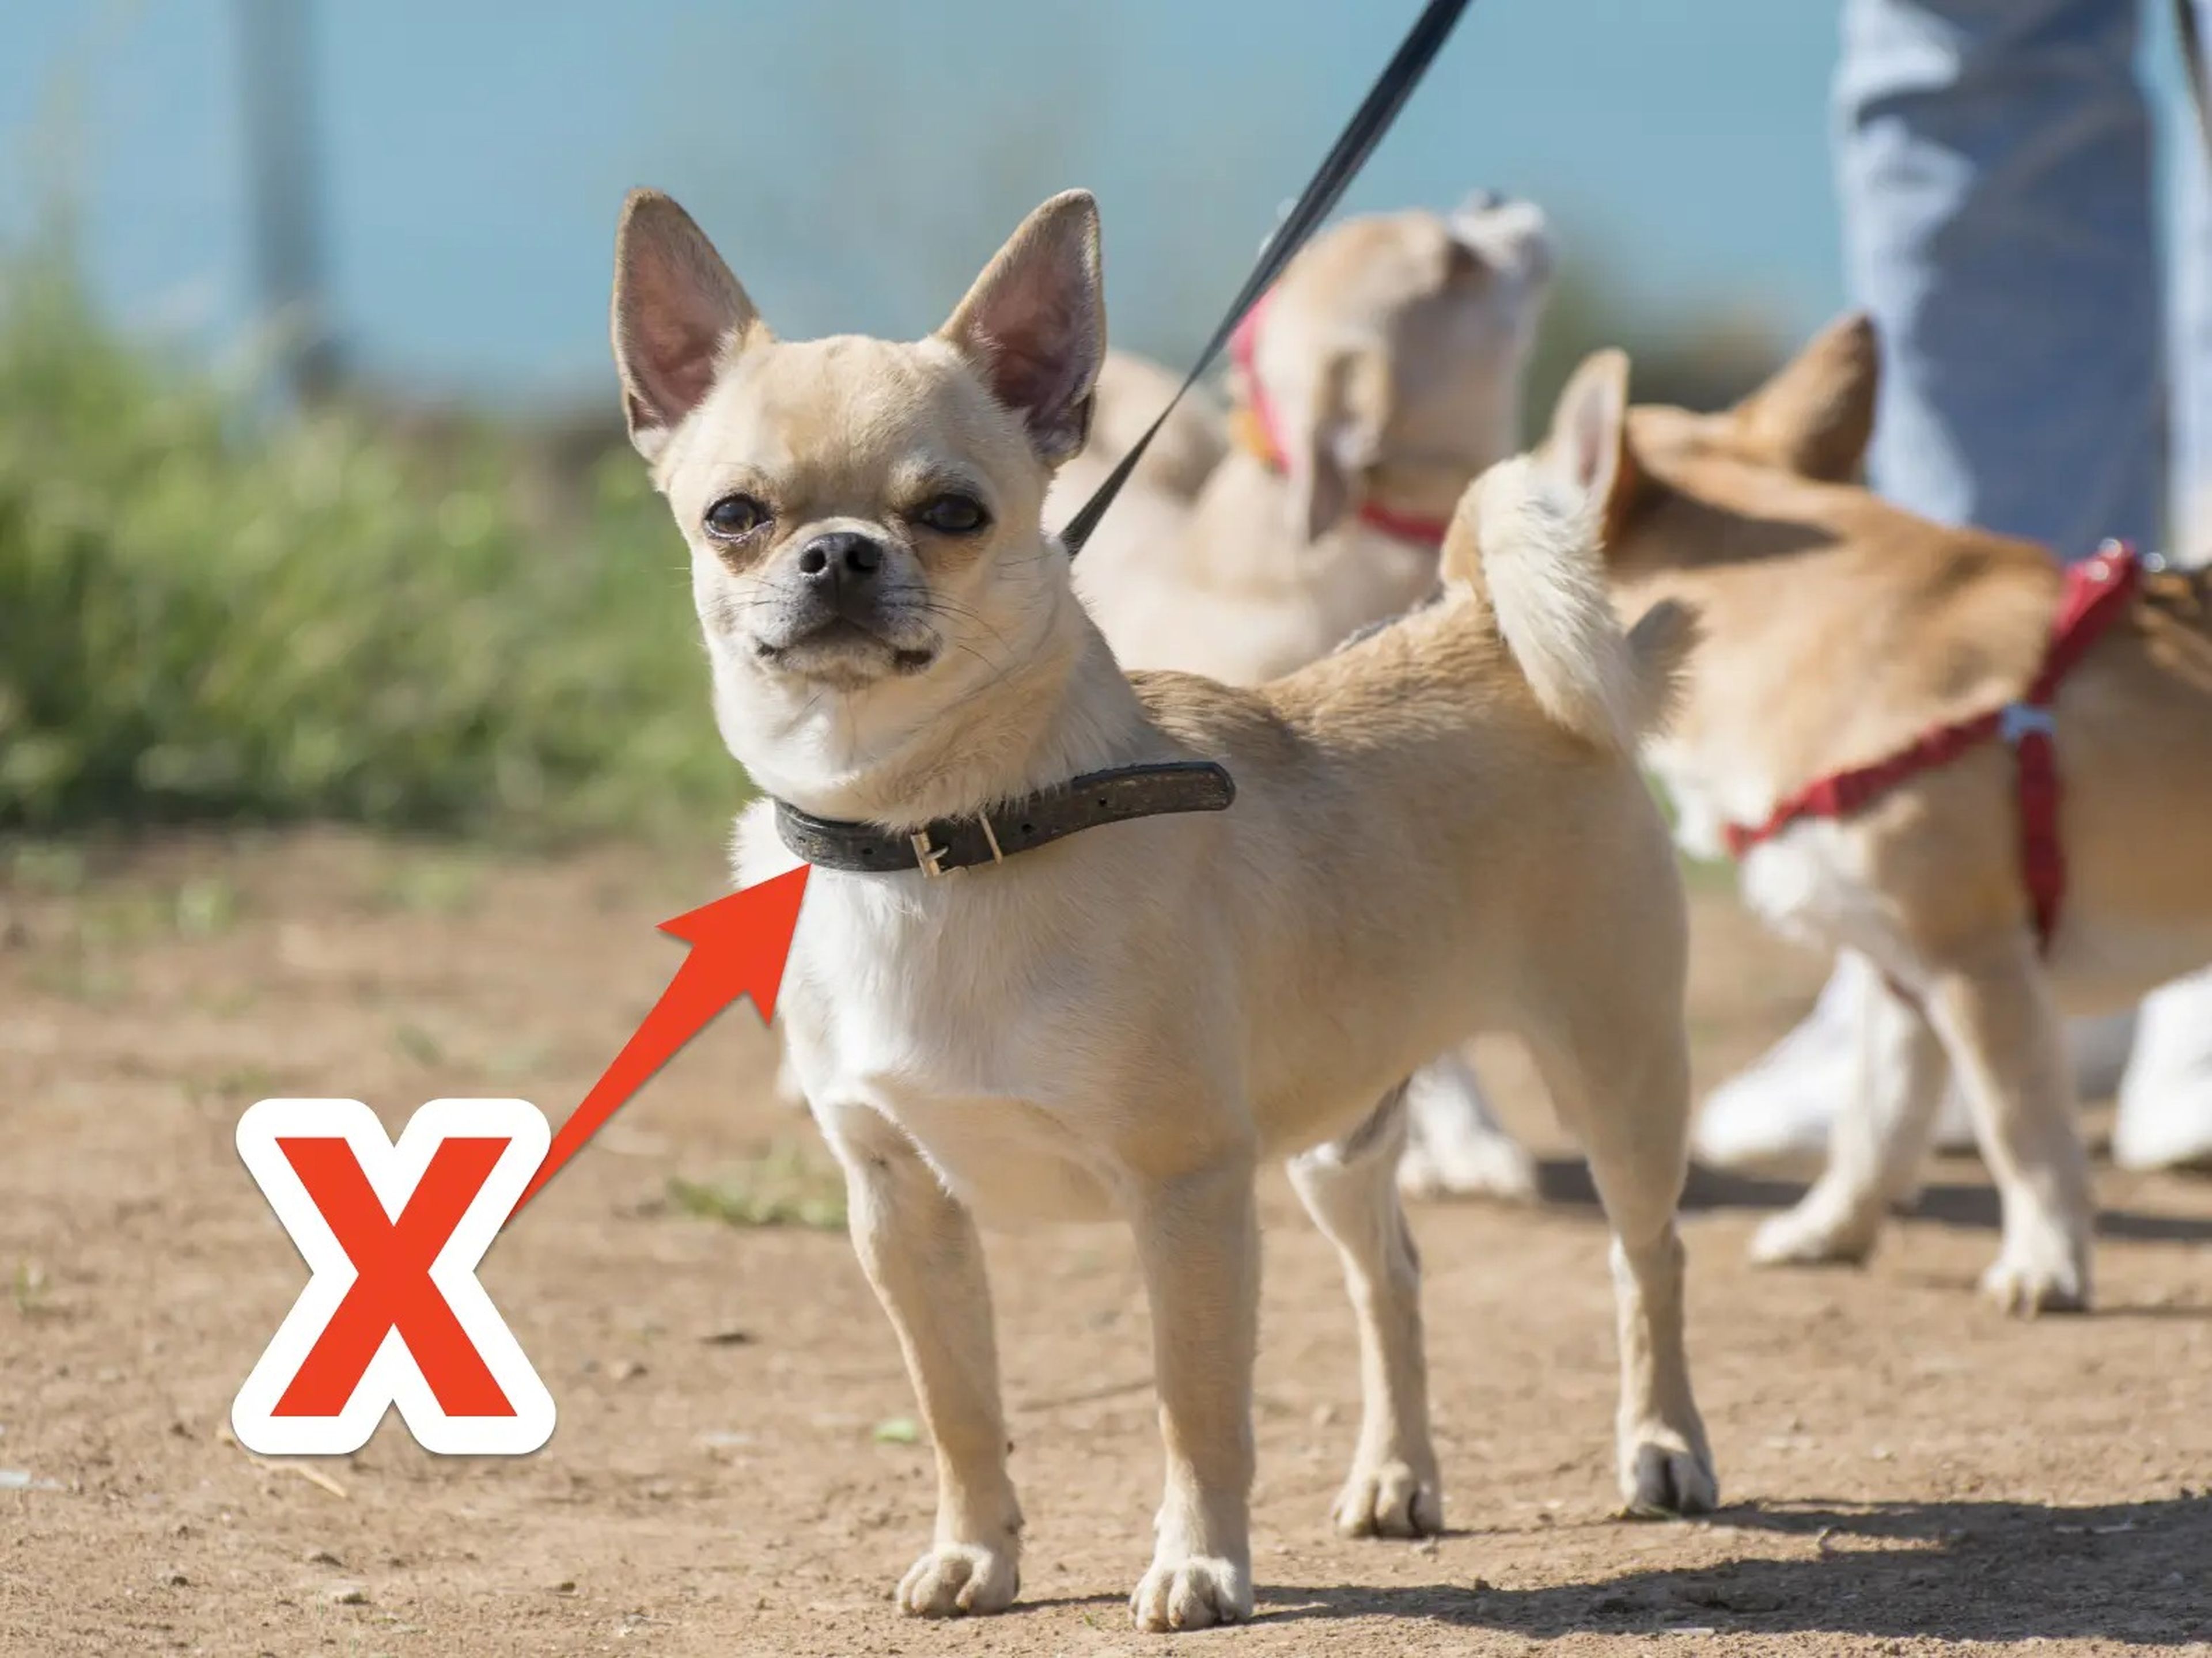 Chihuahua wearing collar and leash with red X and arrow pointing to collar